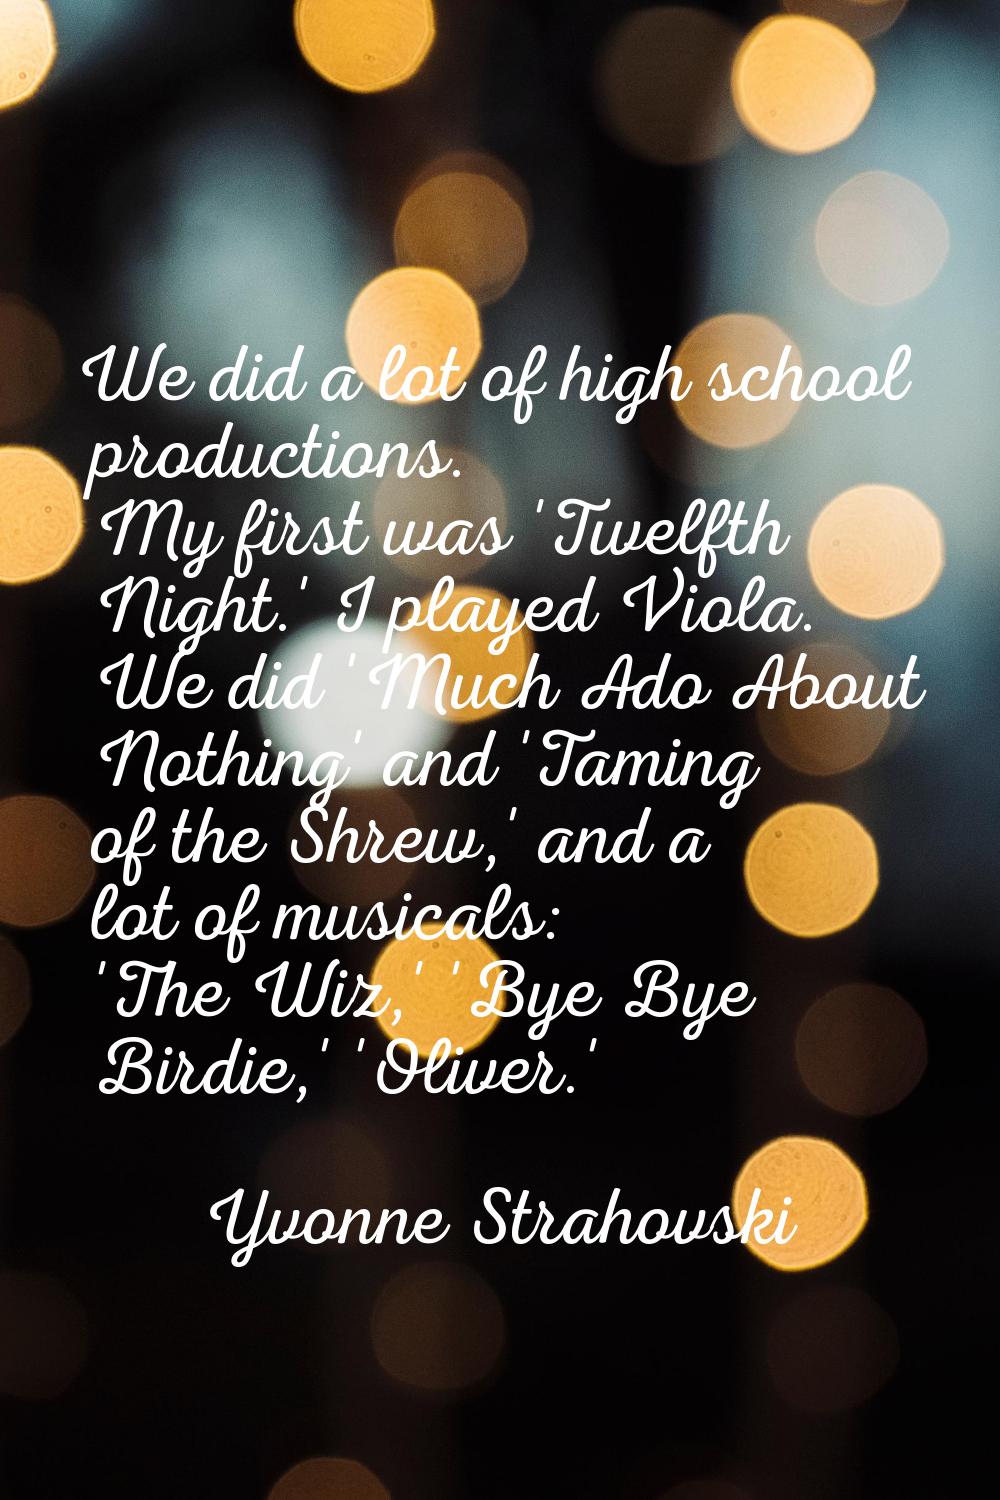 We did a lot of high school productions. My first was 'Twelfth Night.' I played Viola. We did 'Much